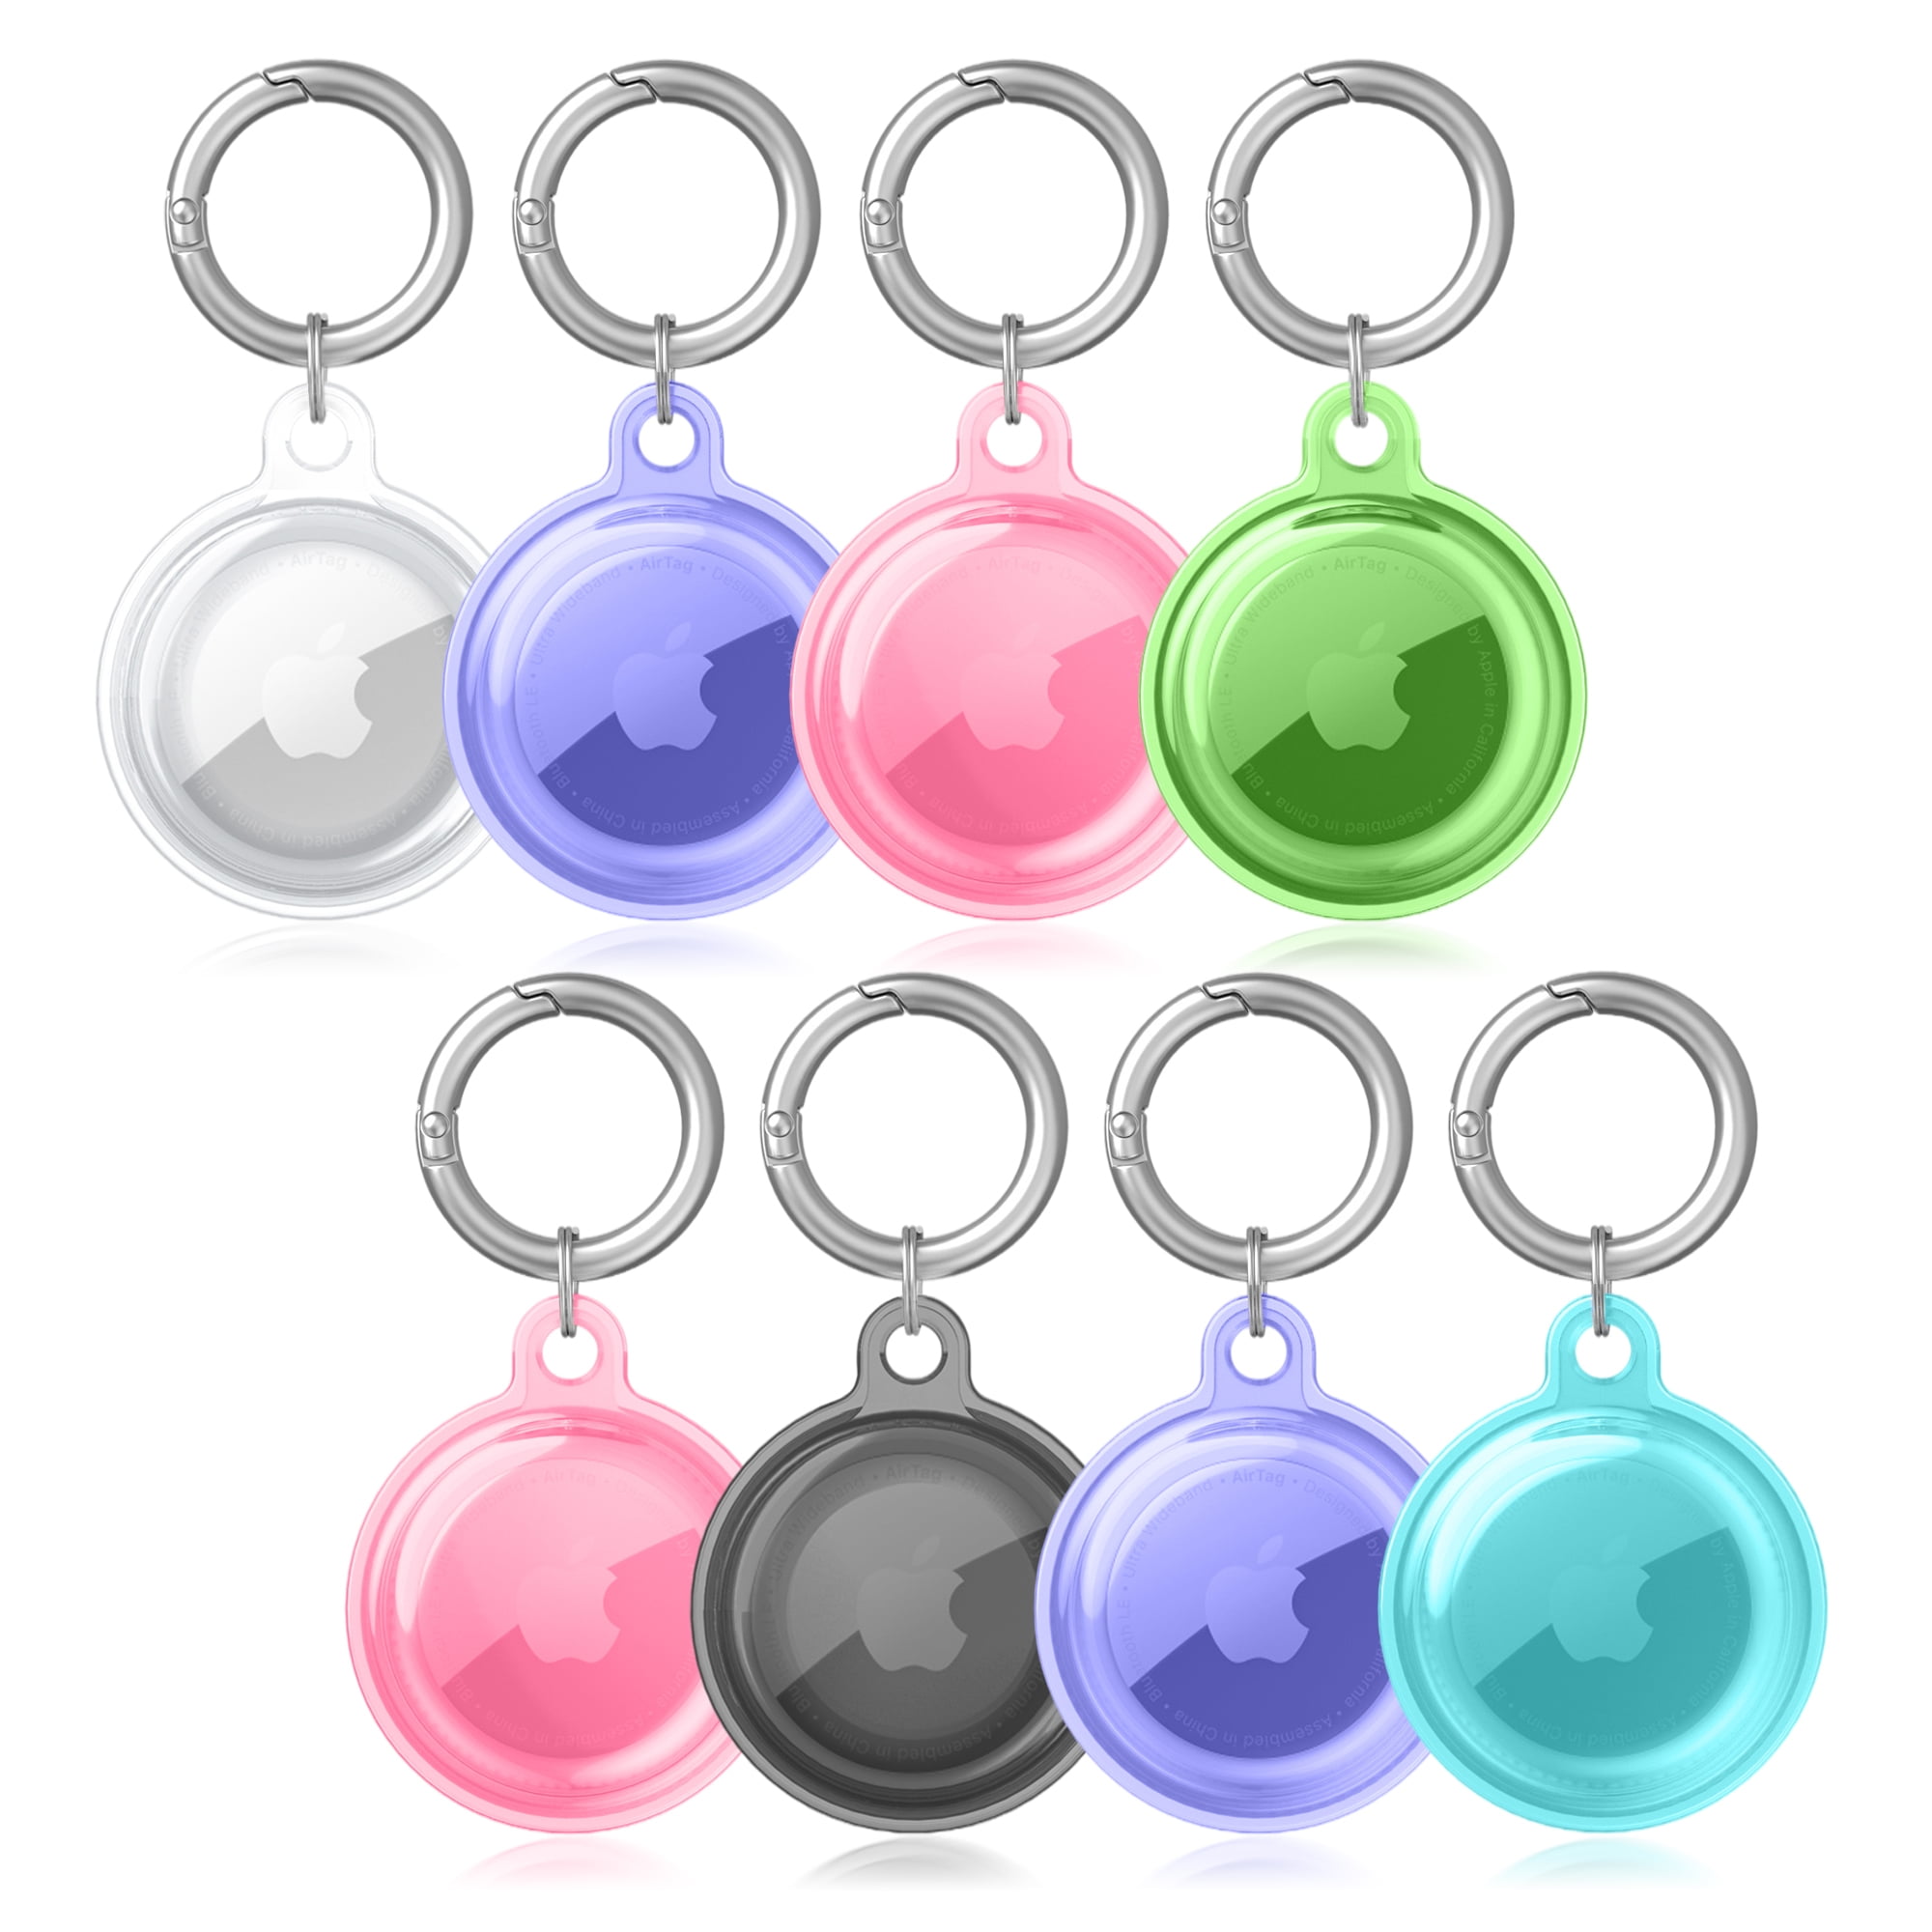 Airtags 4 Pack Soft Silicone Case Compatible with Apple AirTag 2021 Lightweight Skin AirTag Holder Cover with Key Ring for AirTags Keychain Accessories,Black/Purple/White/Blue with Keychain 